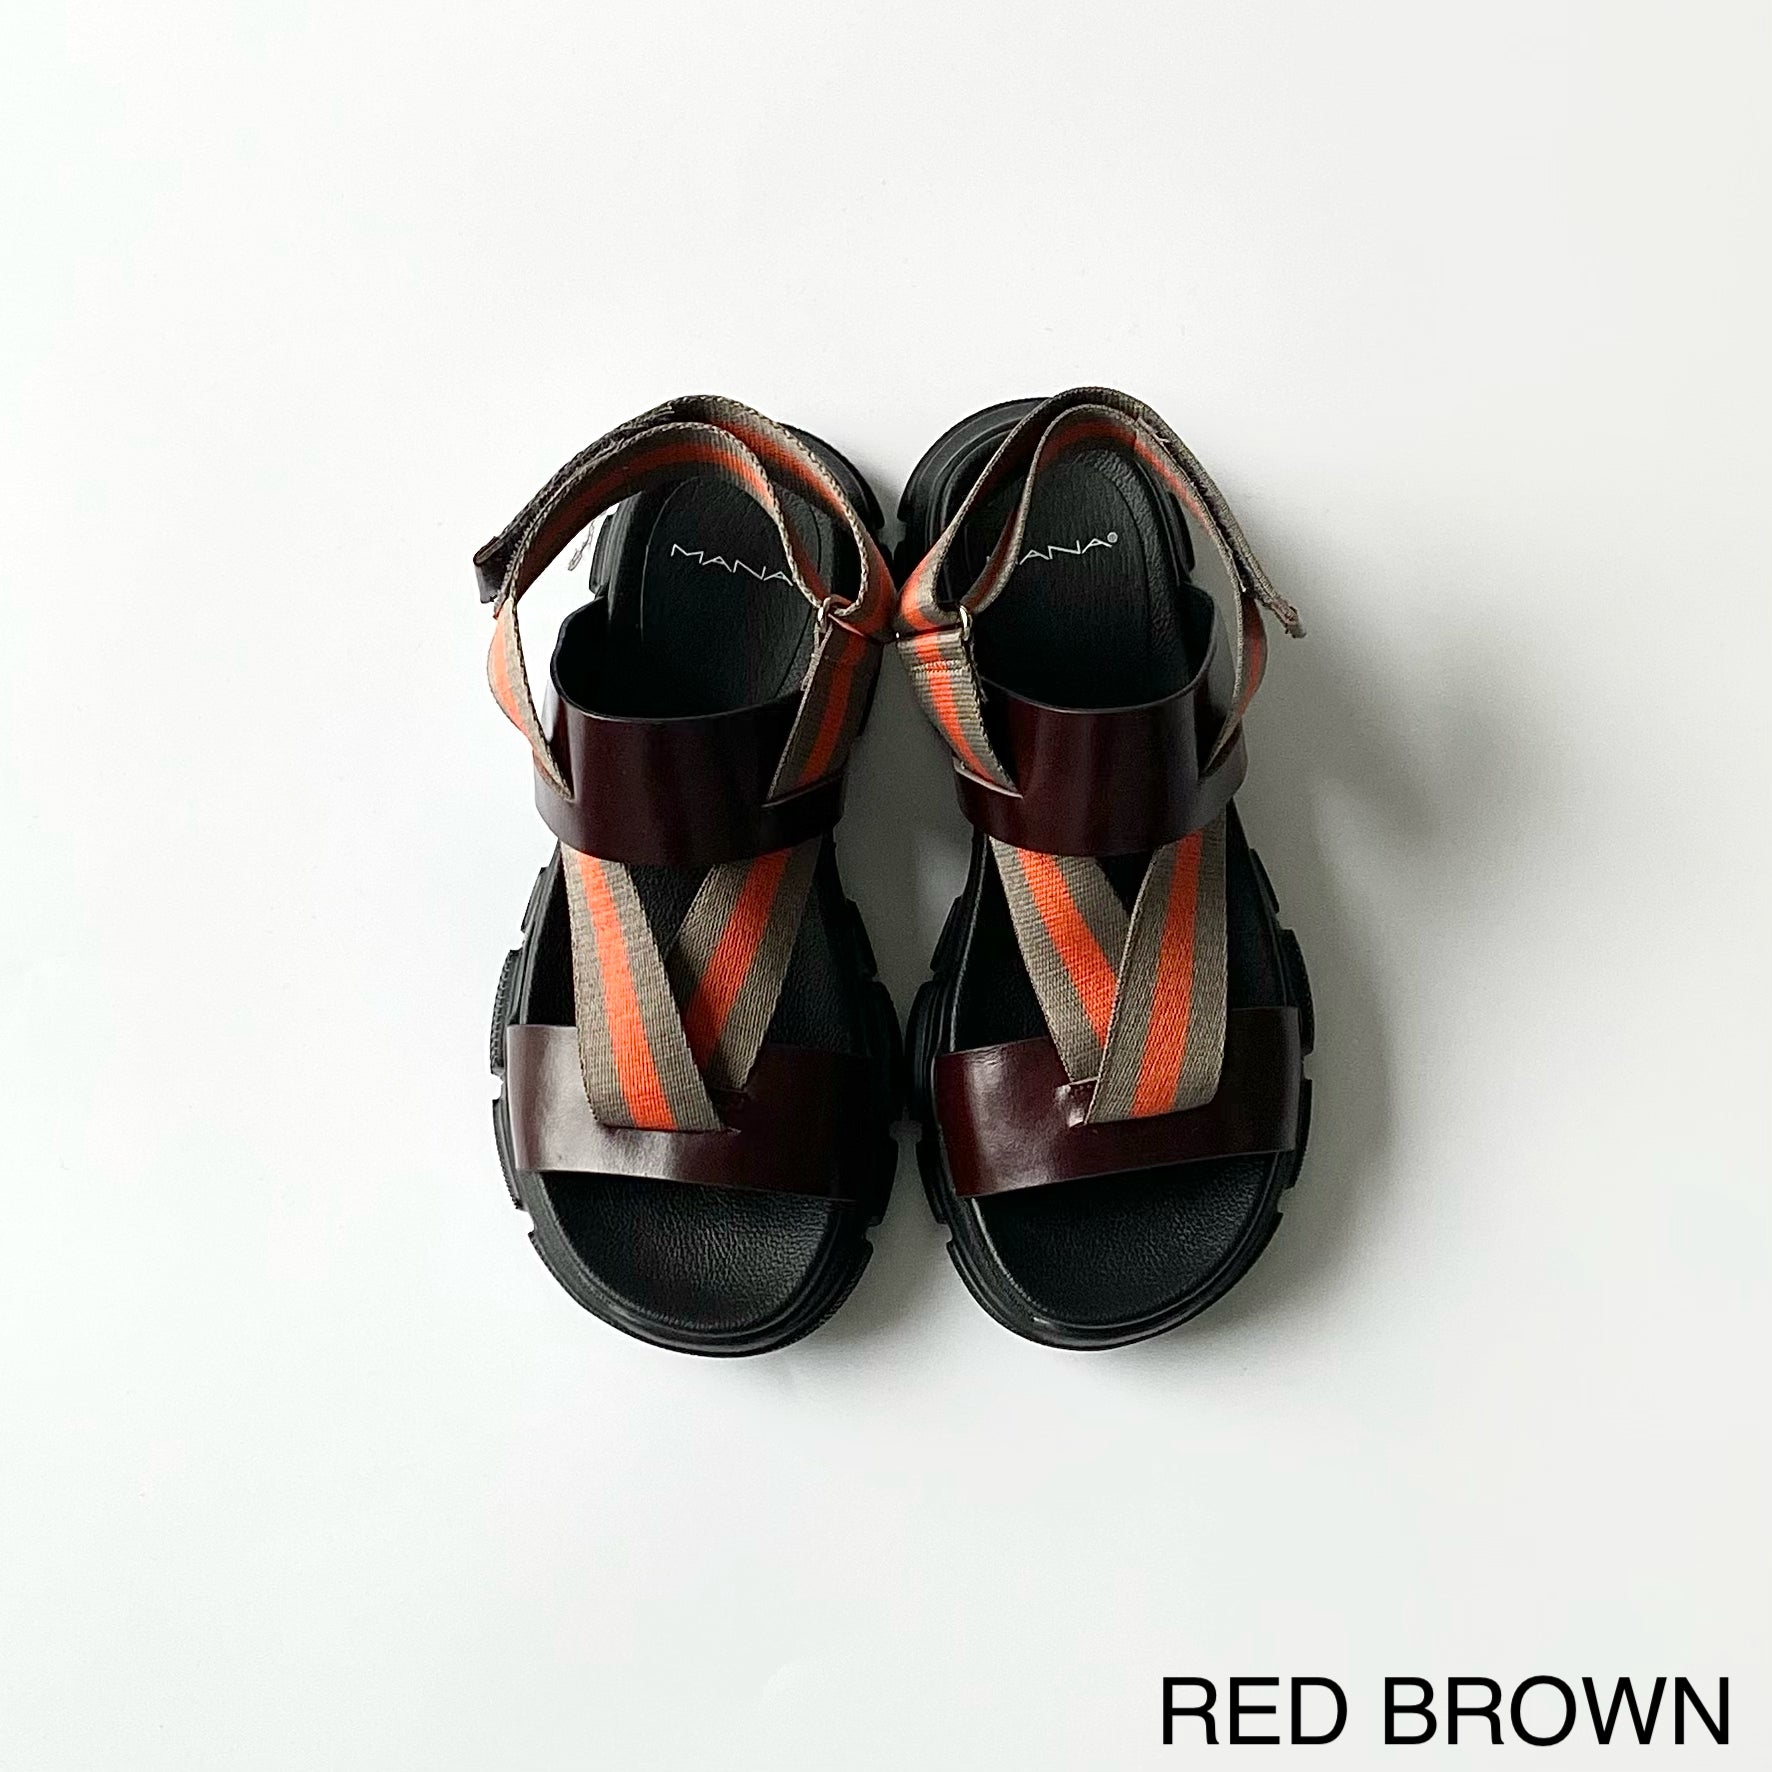 RED BROWN / 35 (22.5cm)